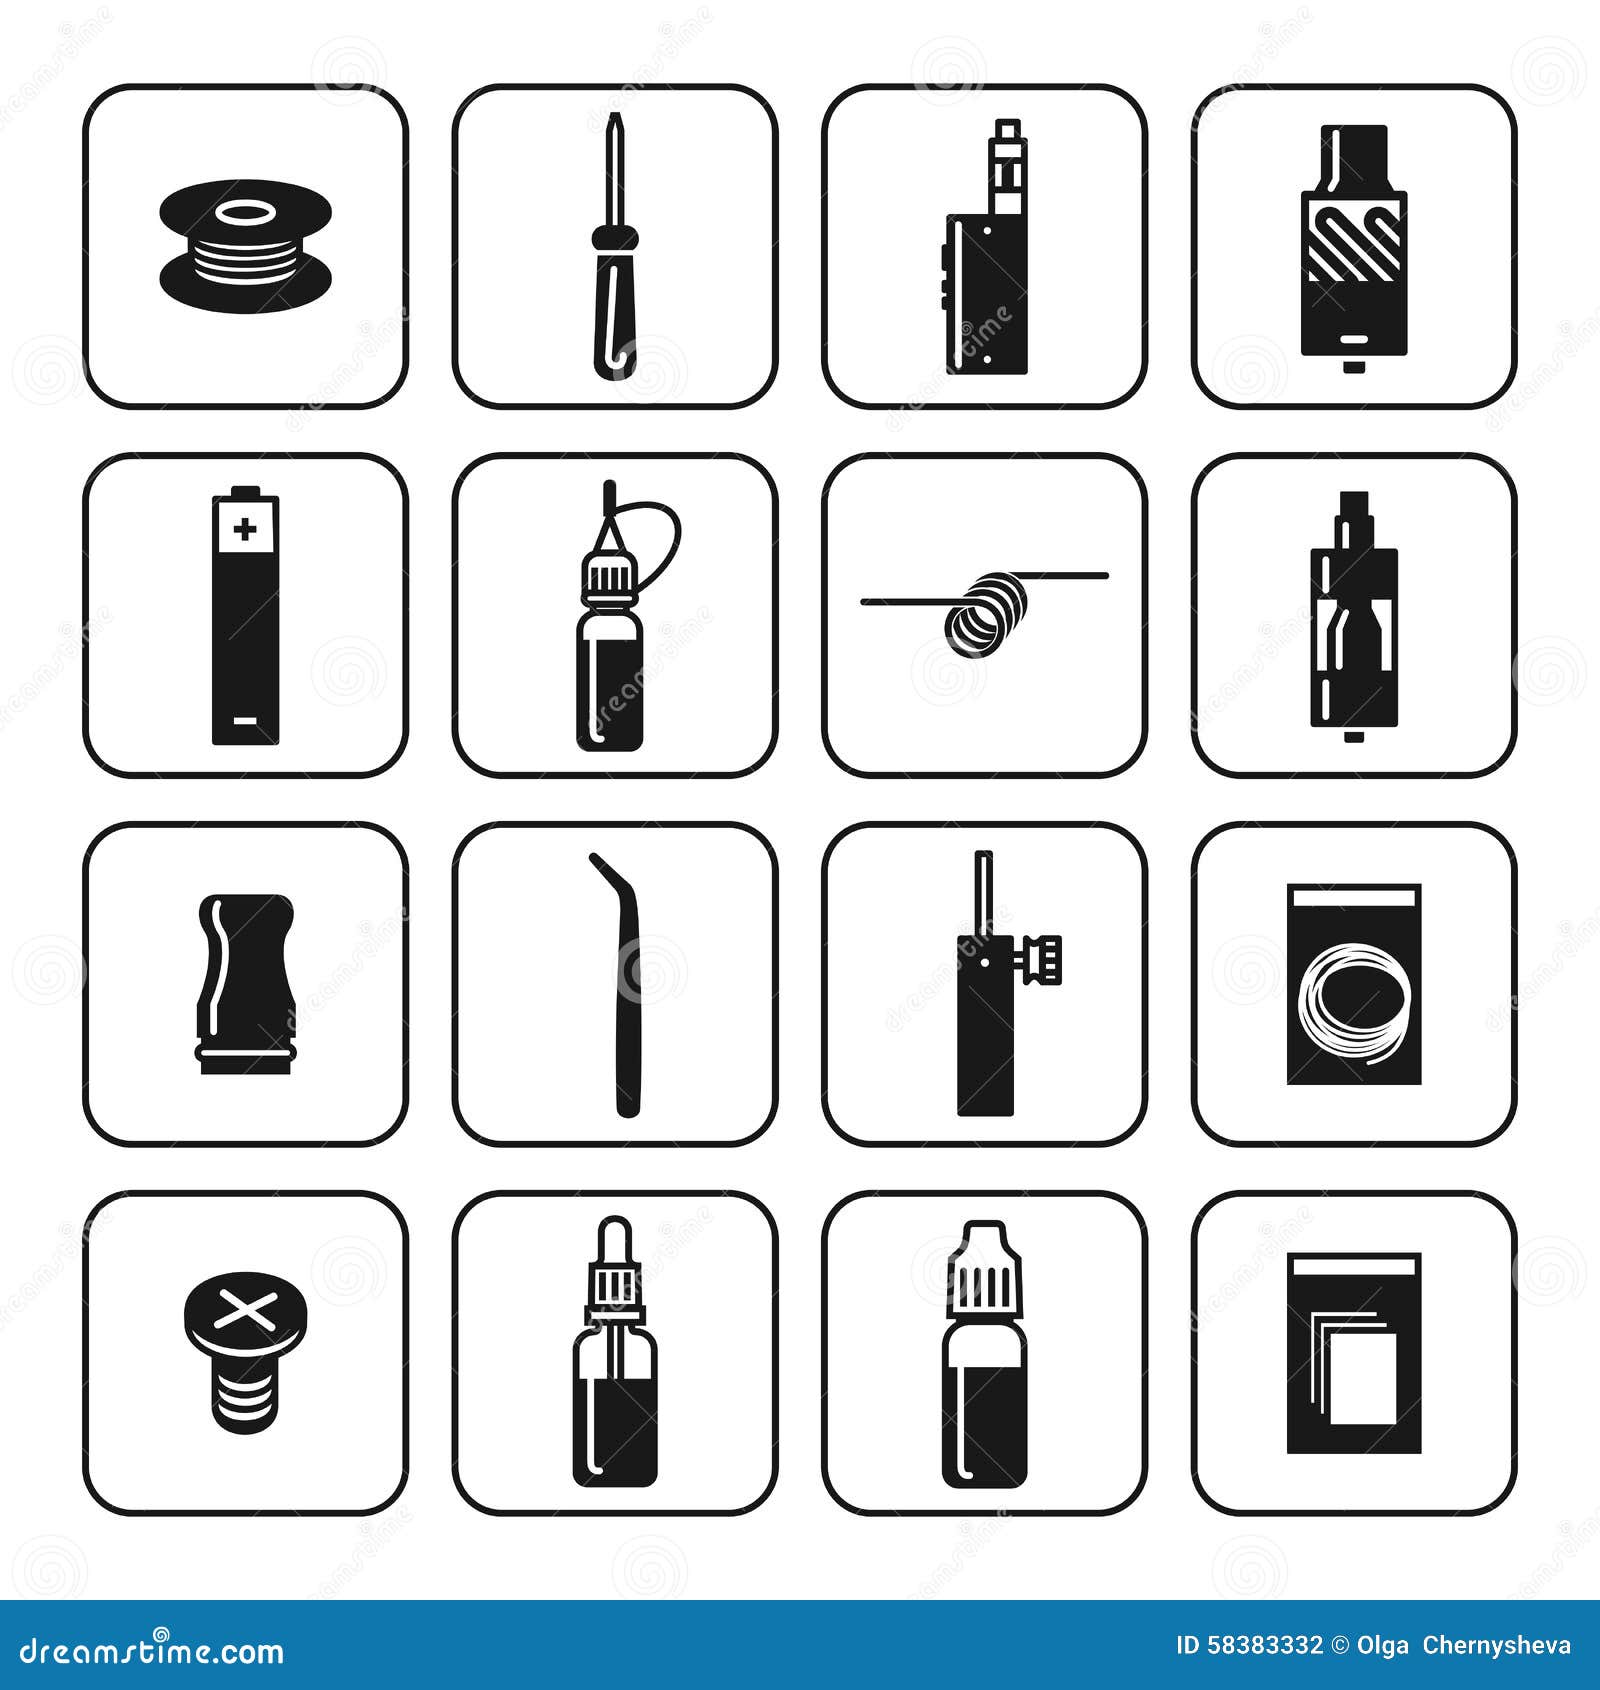  icons set of vaporizer and accessories